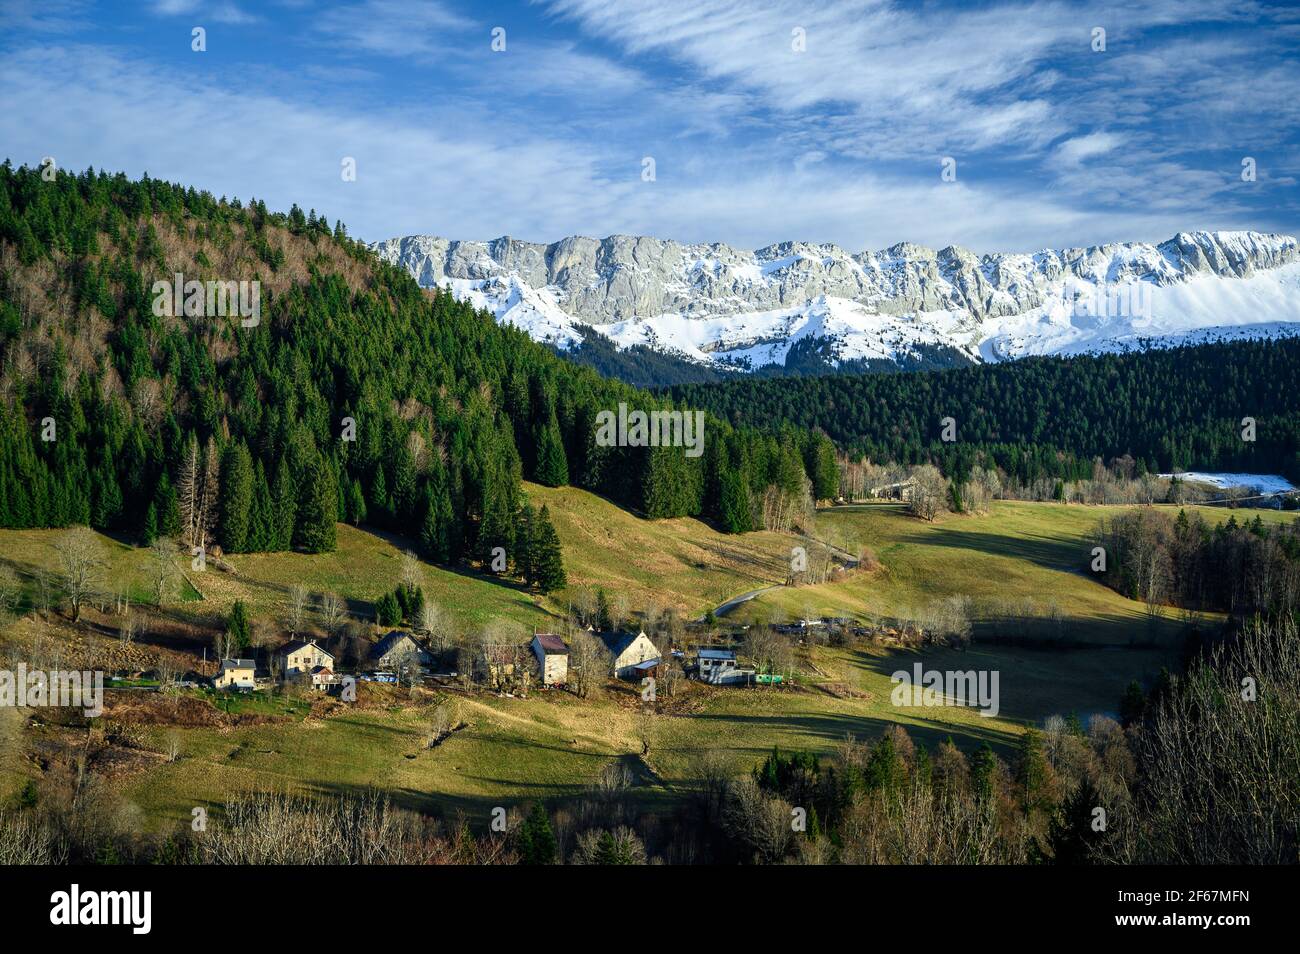 Aerial view of green mountain landscape. Few houses surrounded by meadows and forest. Vercors rocky mountain ridge covered with snow in background. Stock Photo